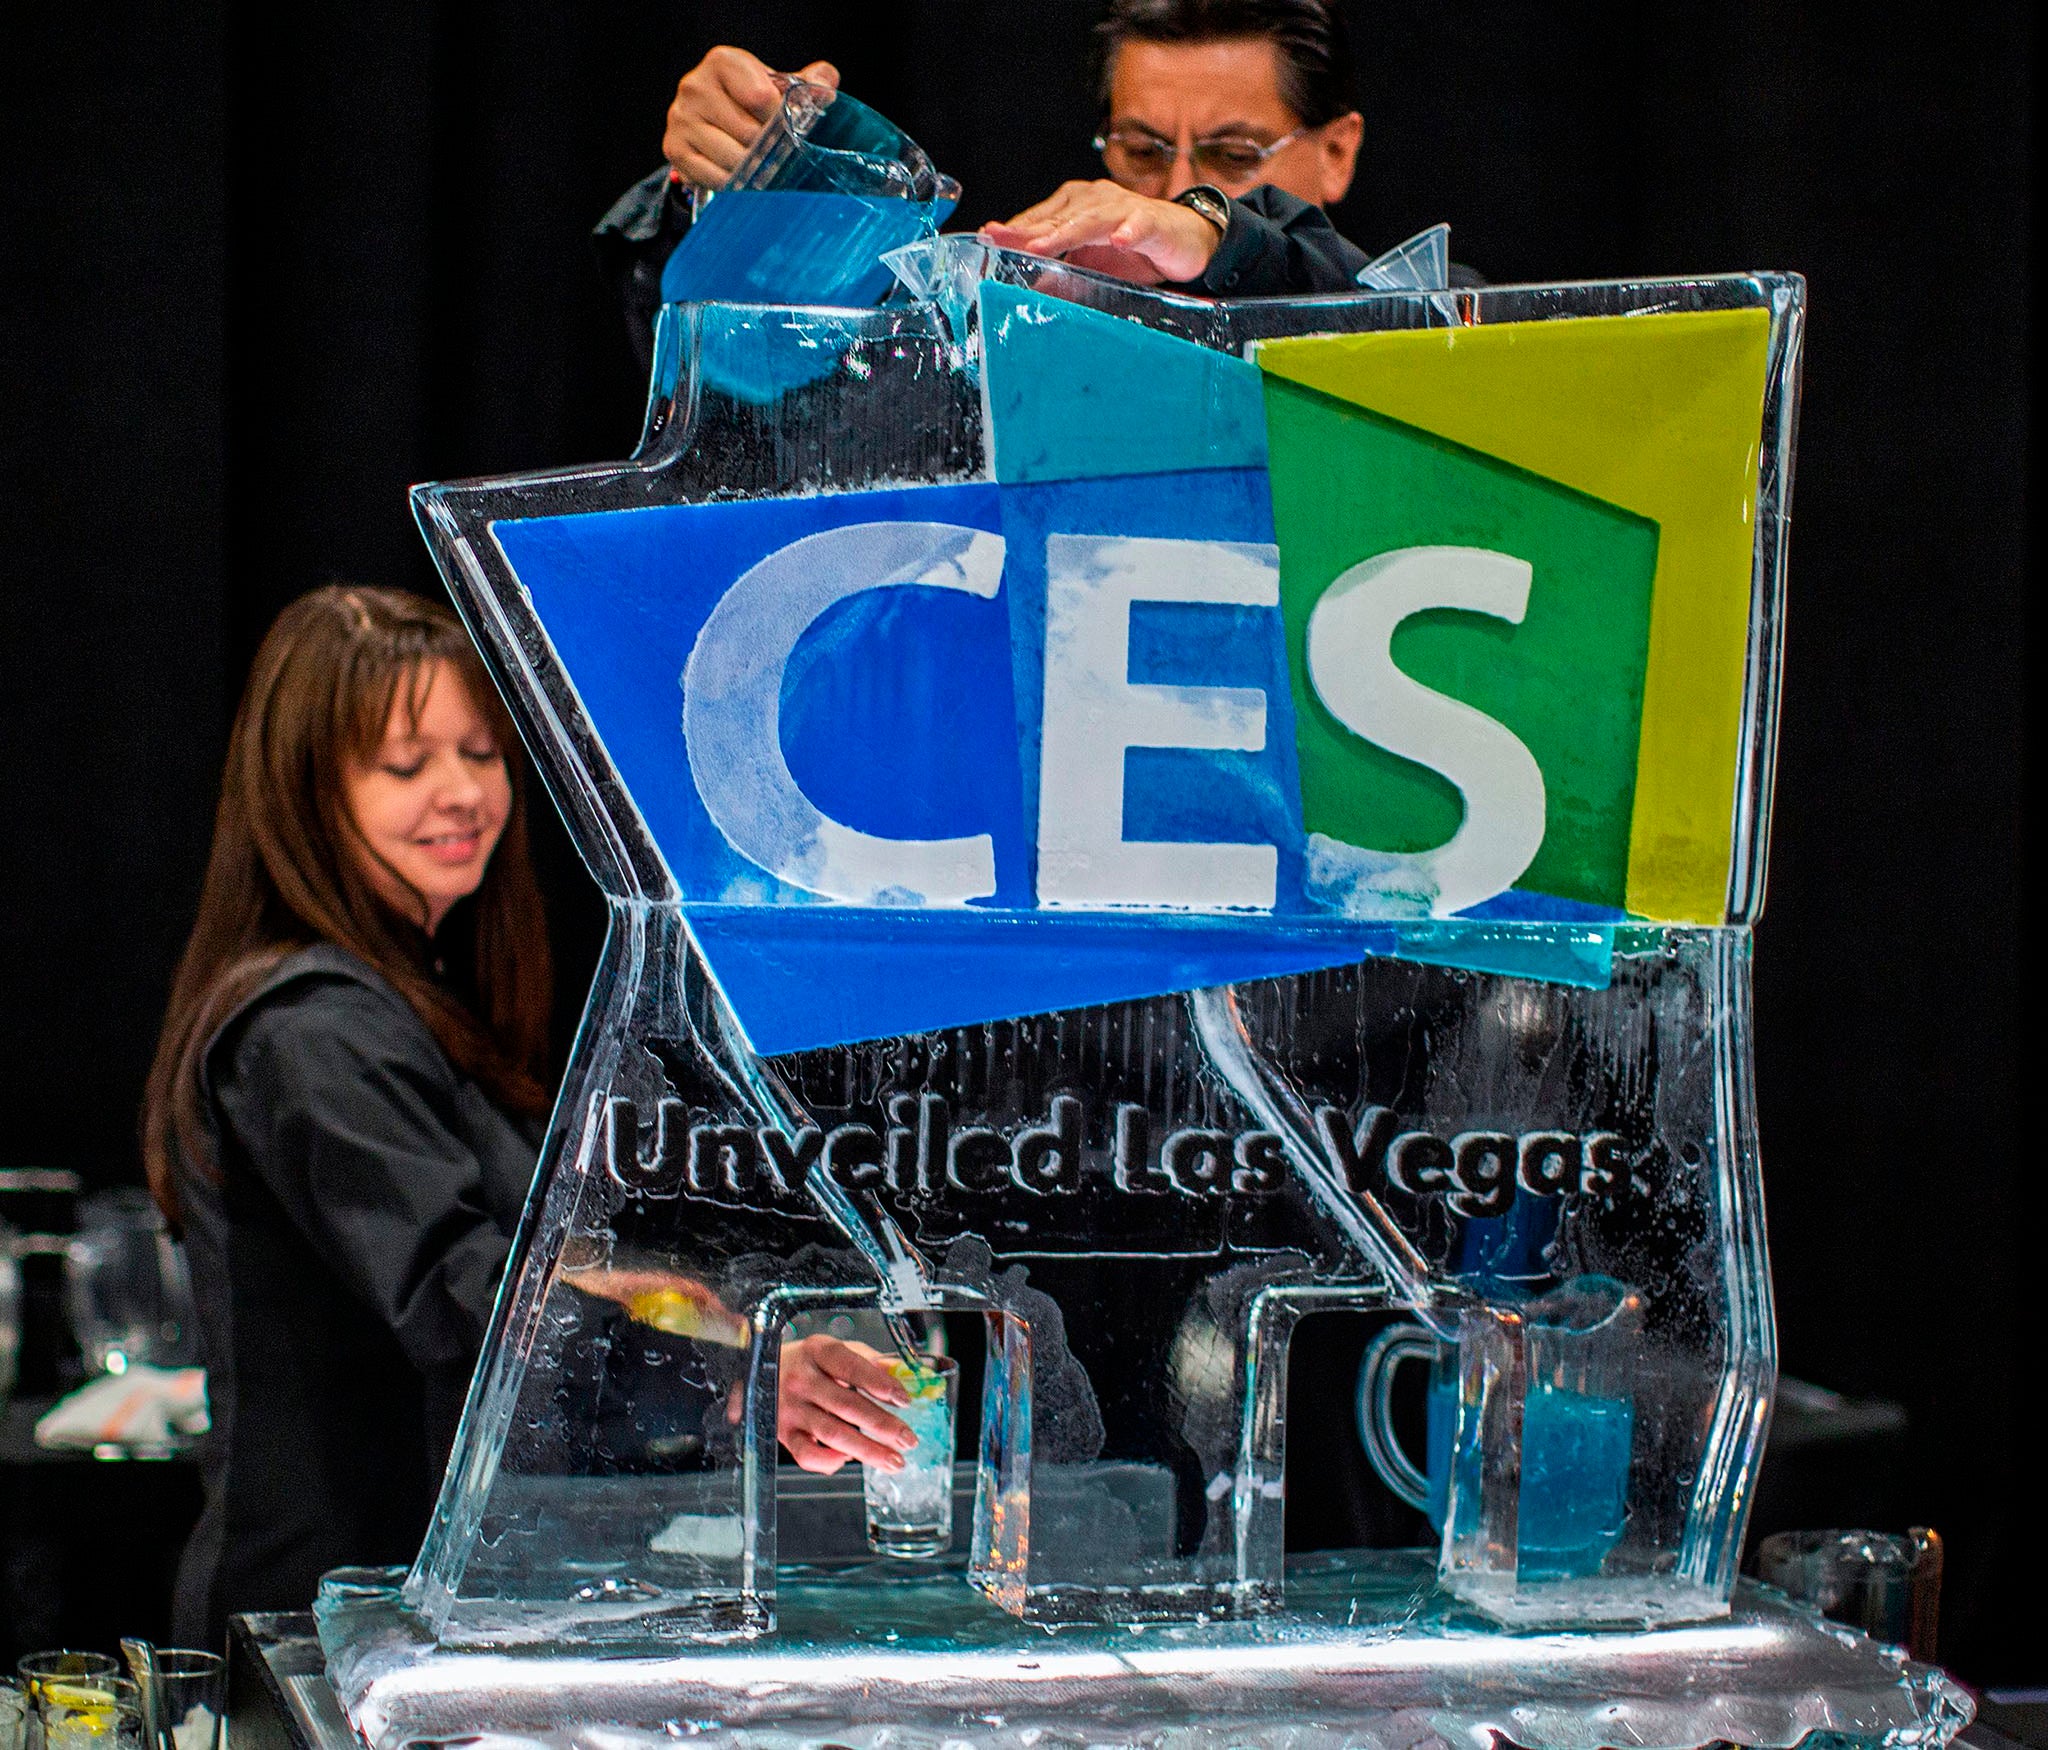 The Consumer Electronics Show (CES) is held annually in Las Vegas, and hosts presentations of new products and technologies